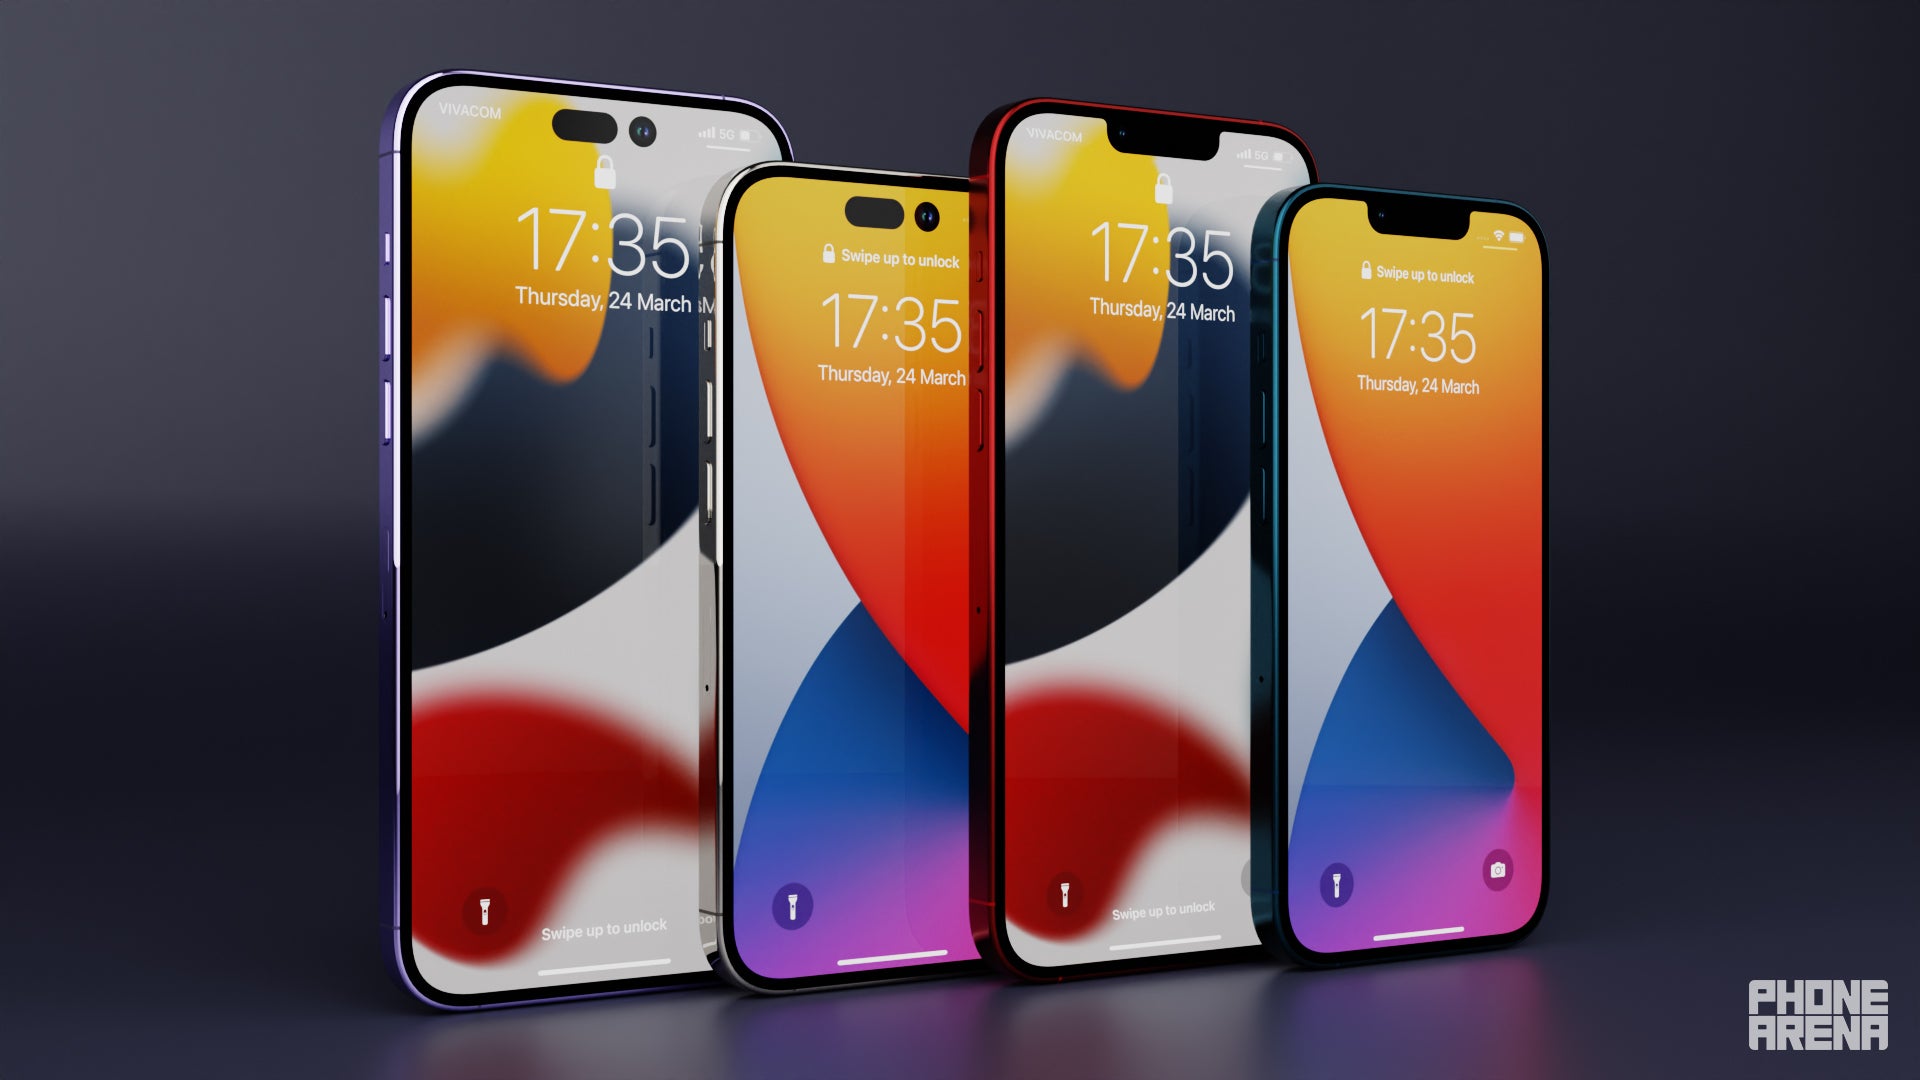 We've heard rumors that the iPhone 14 Pro and Pro Max will either have two cutouts (as seen above) or a single, horizontal pill-shaped cutout - iPhone 14 and Apple's clever way of modernizing it, while keeping it recognizable in a crowd of slab phones